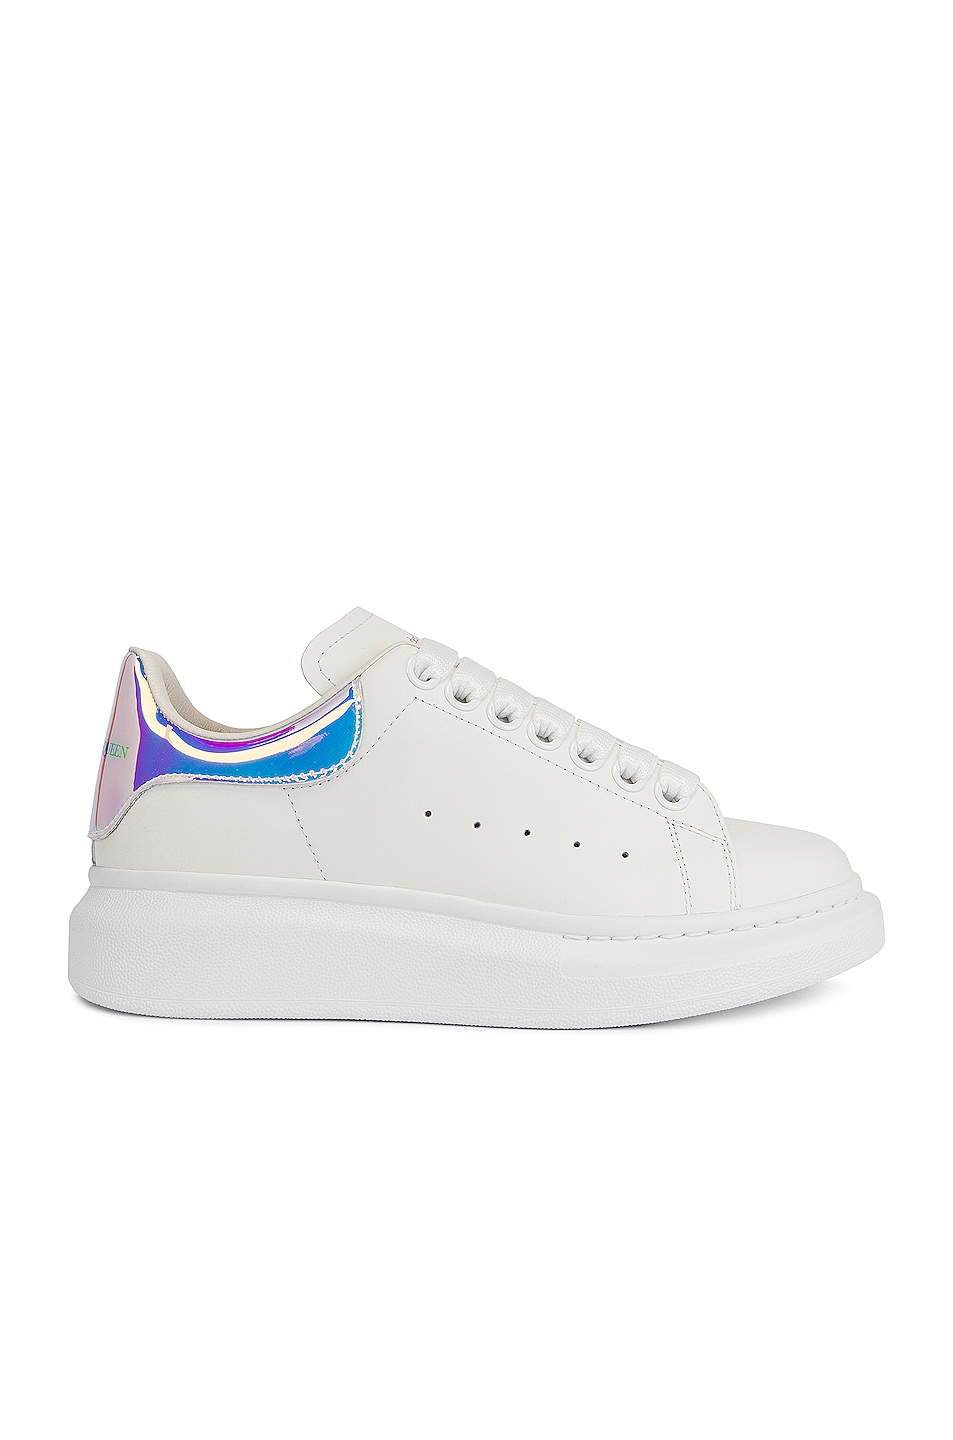 Image 1 of Alexander McQueen Lace Up Sneakers in White & Shock Pink